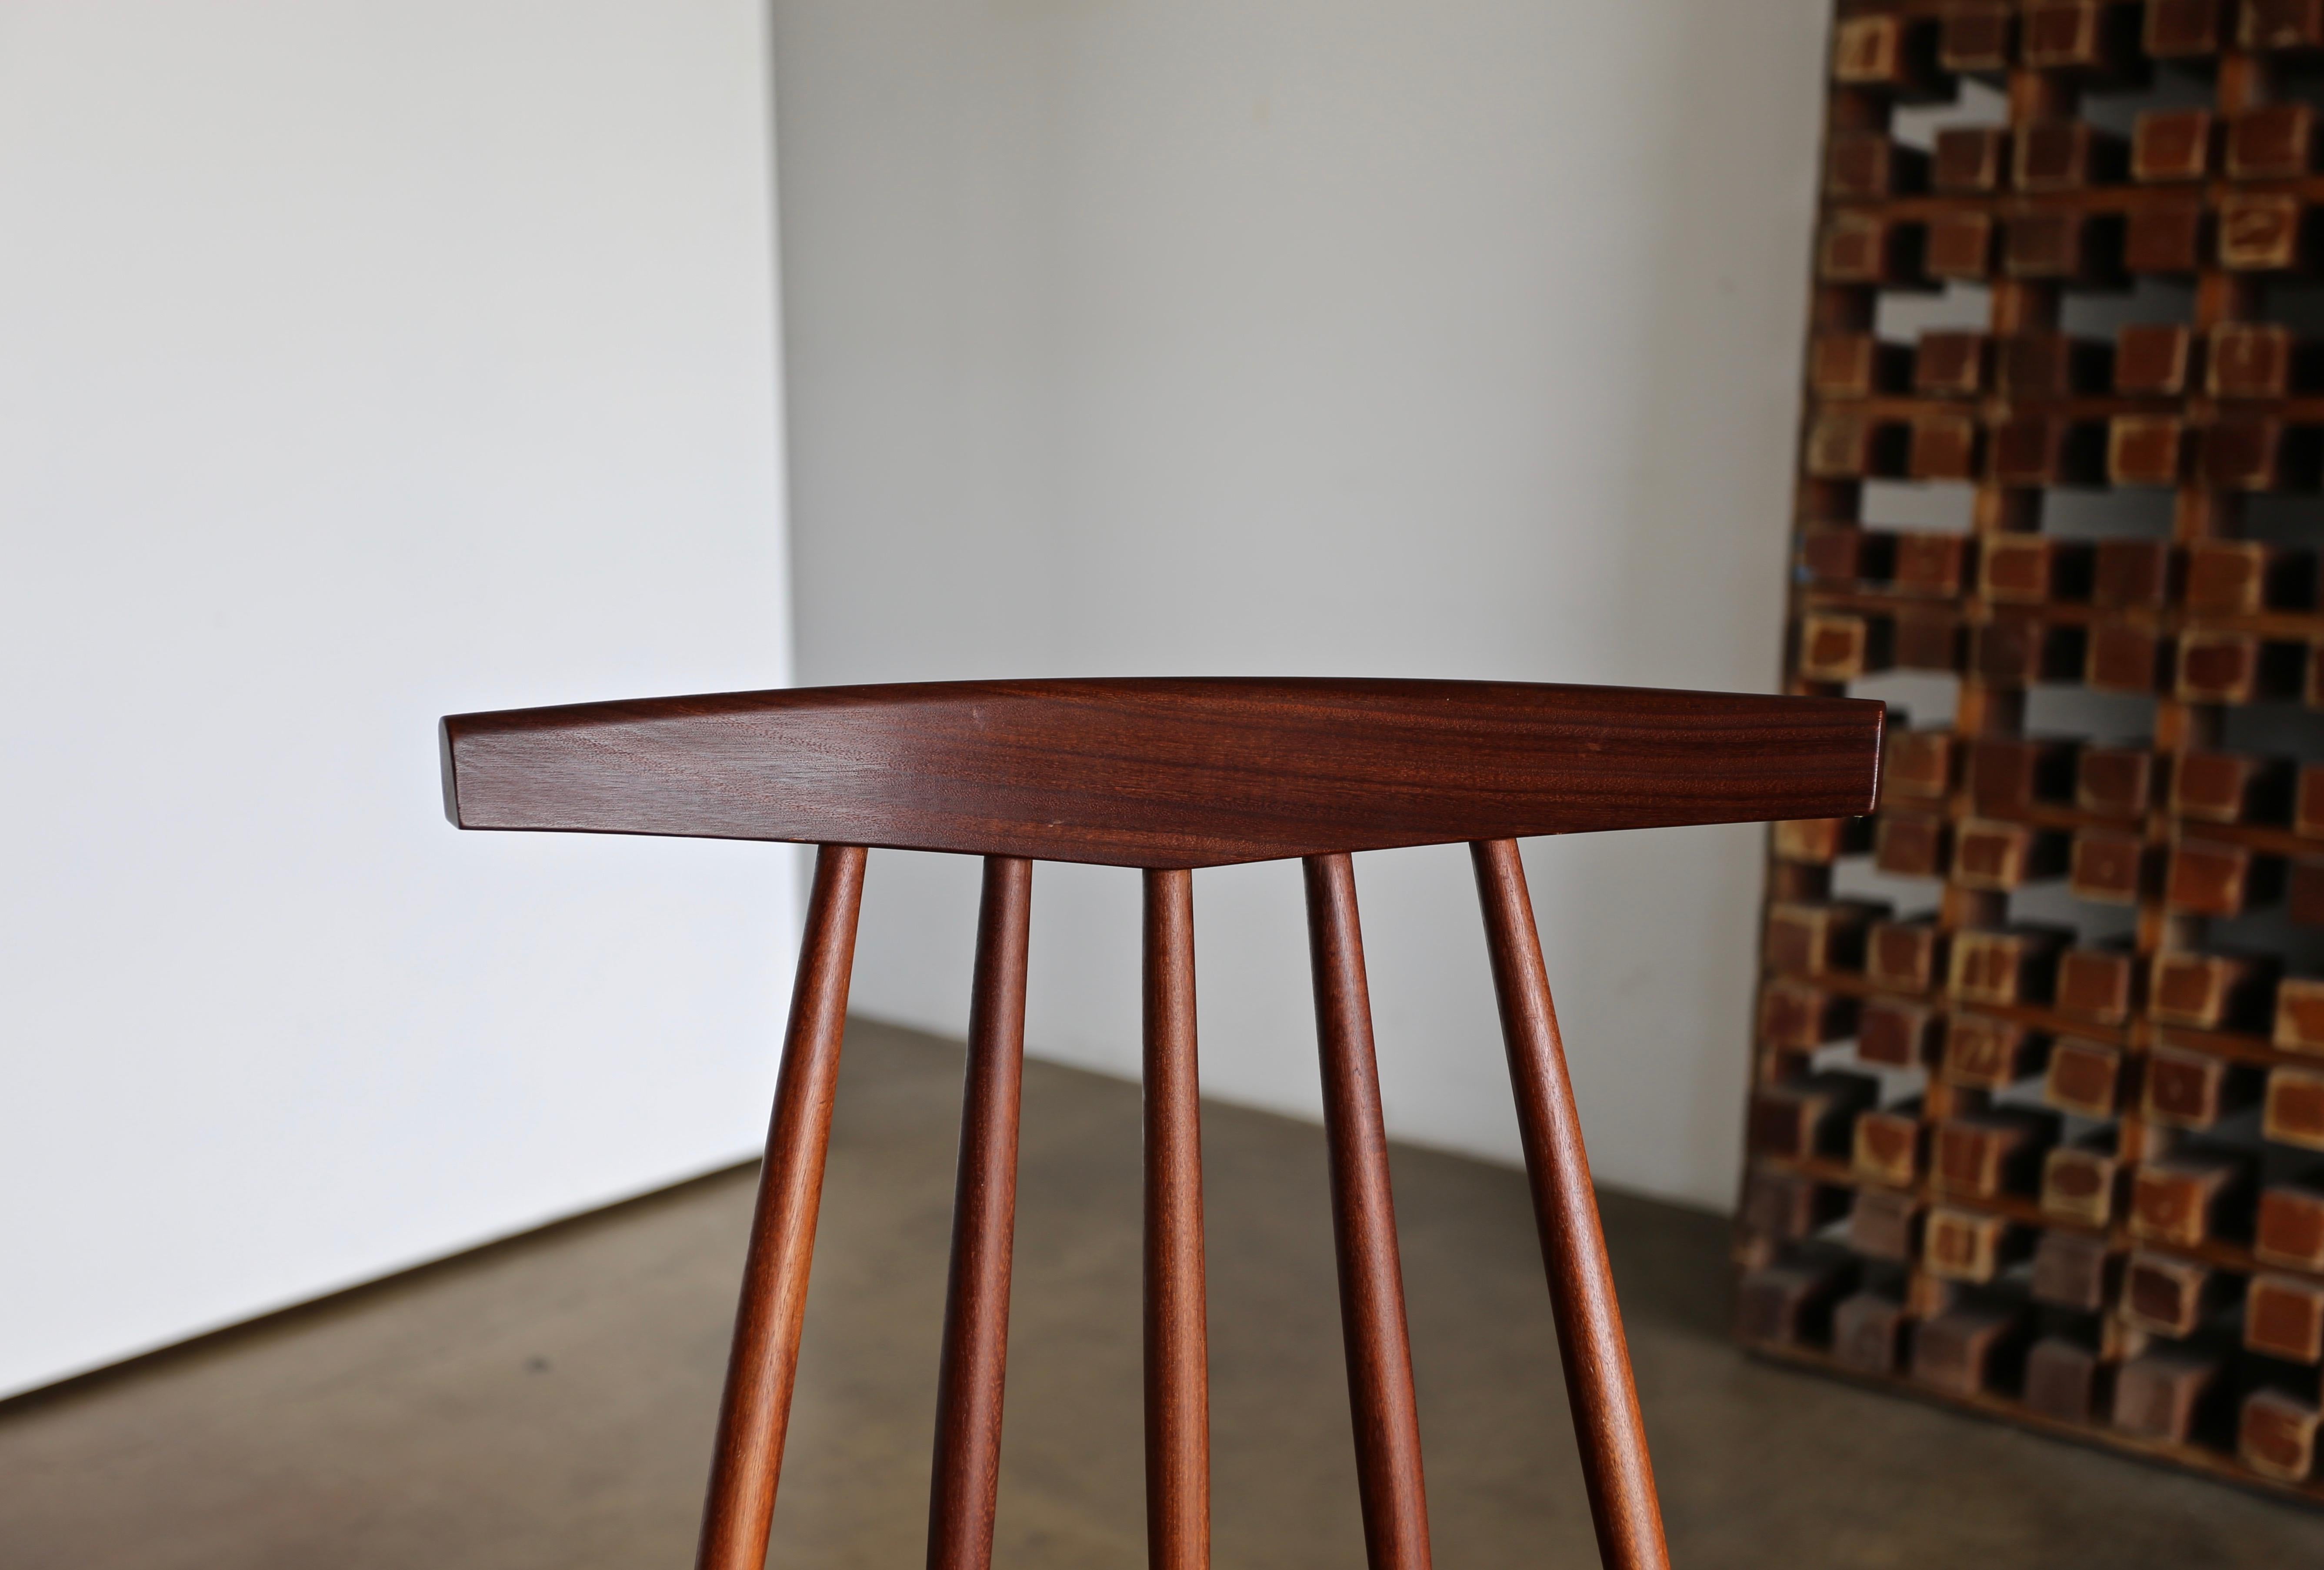 20th Century Poul Volther Spindle Back Chair for Frem Rojle, circa 1960